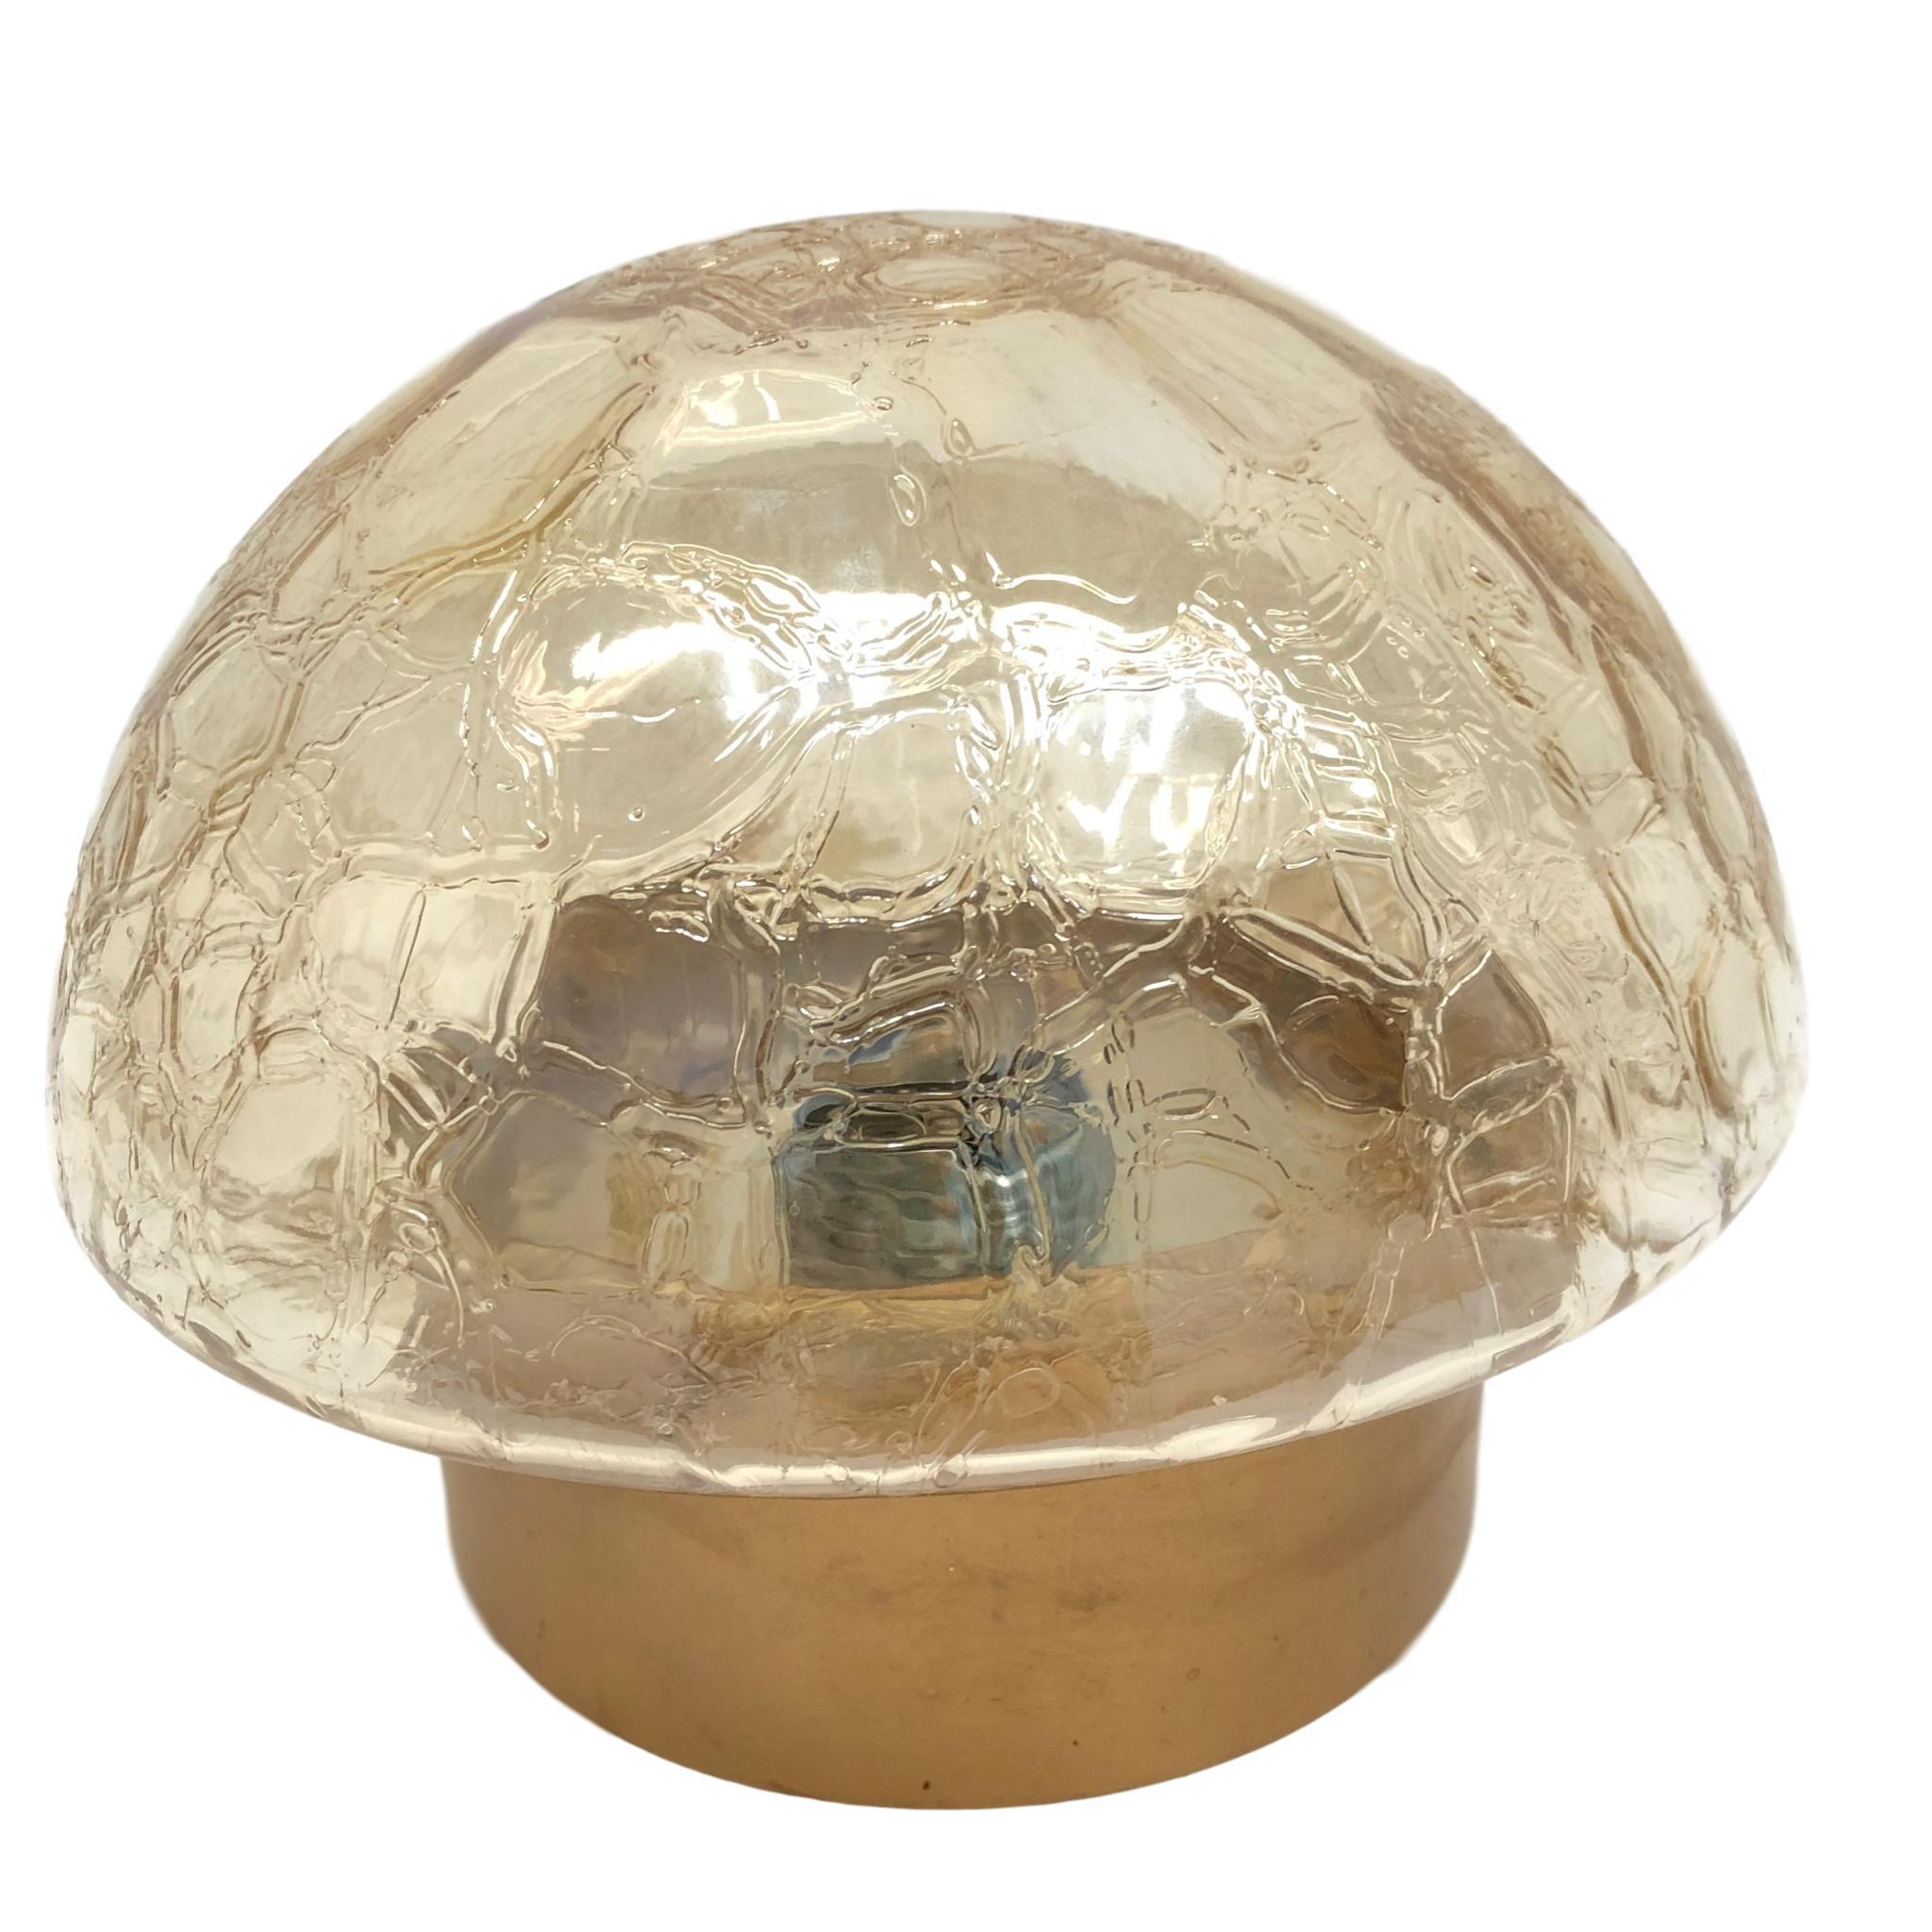 A beautiful flush mount manufactured by RZB Leuchten. A circa 1960s, German tortoiseshell amber glass flush mount or sconce. The fixture requires one European E27 Edison bulb, up to 75 watts.